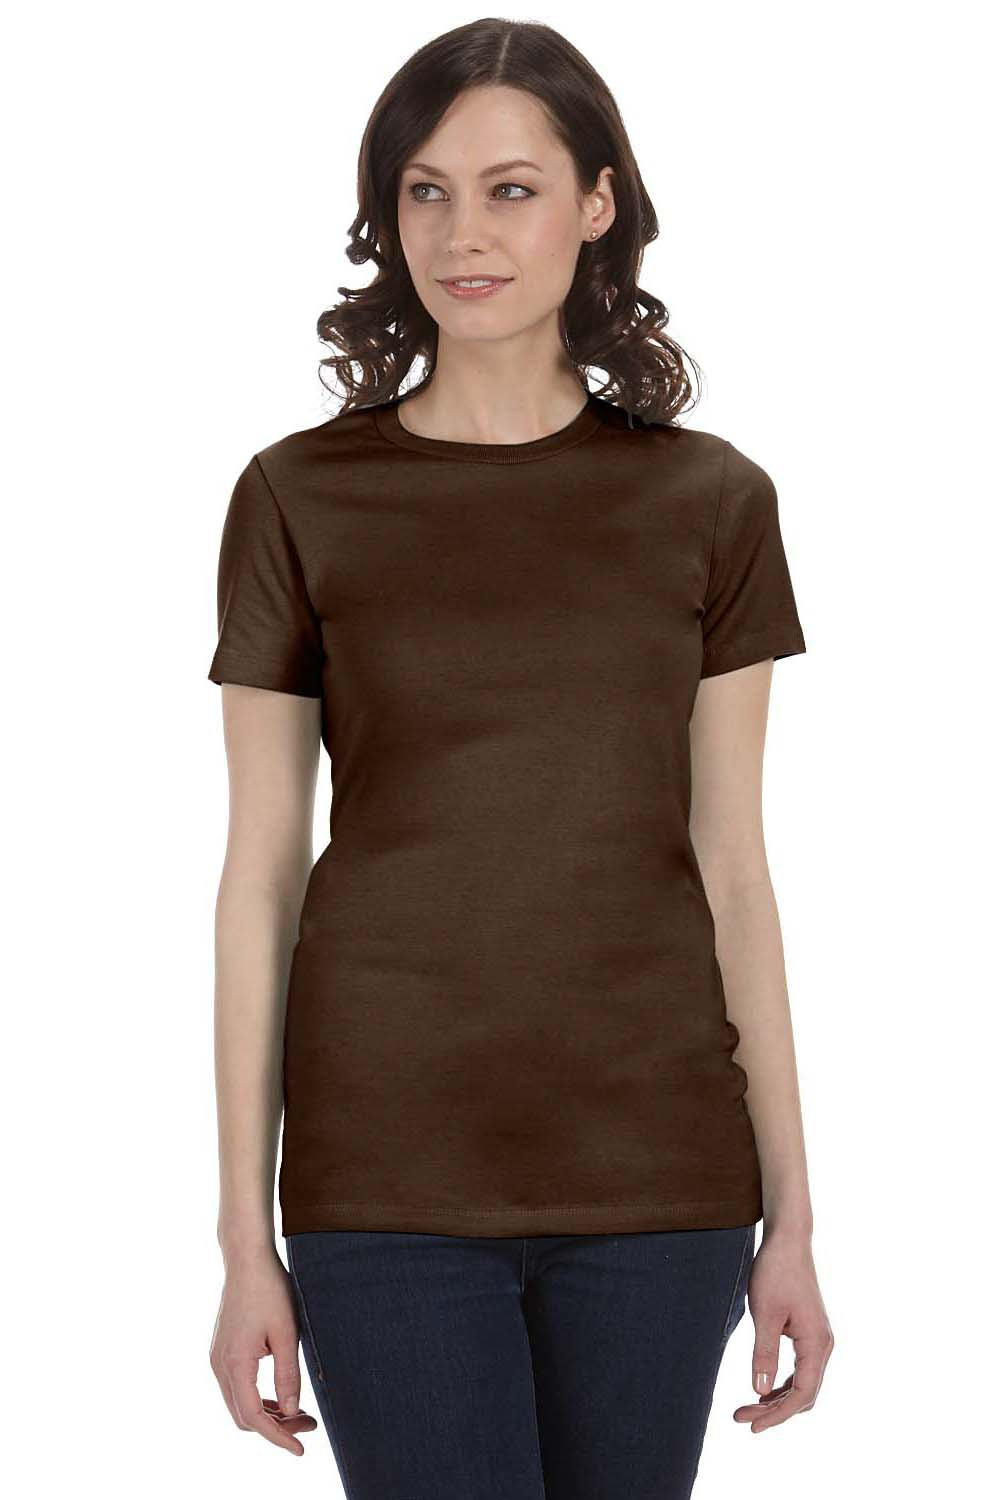 Bella + Canvas 6004 Womens The Favorite Short Sleeve Crewneck T-Shirt Chocolate Brown Front